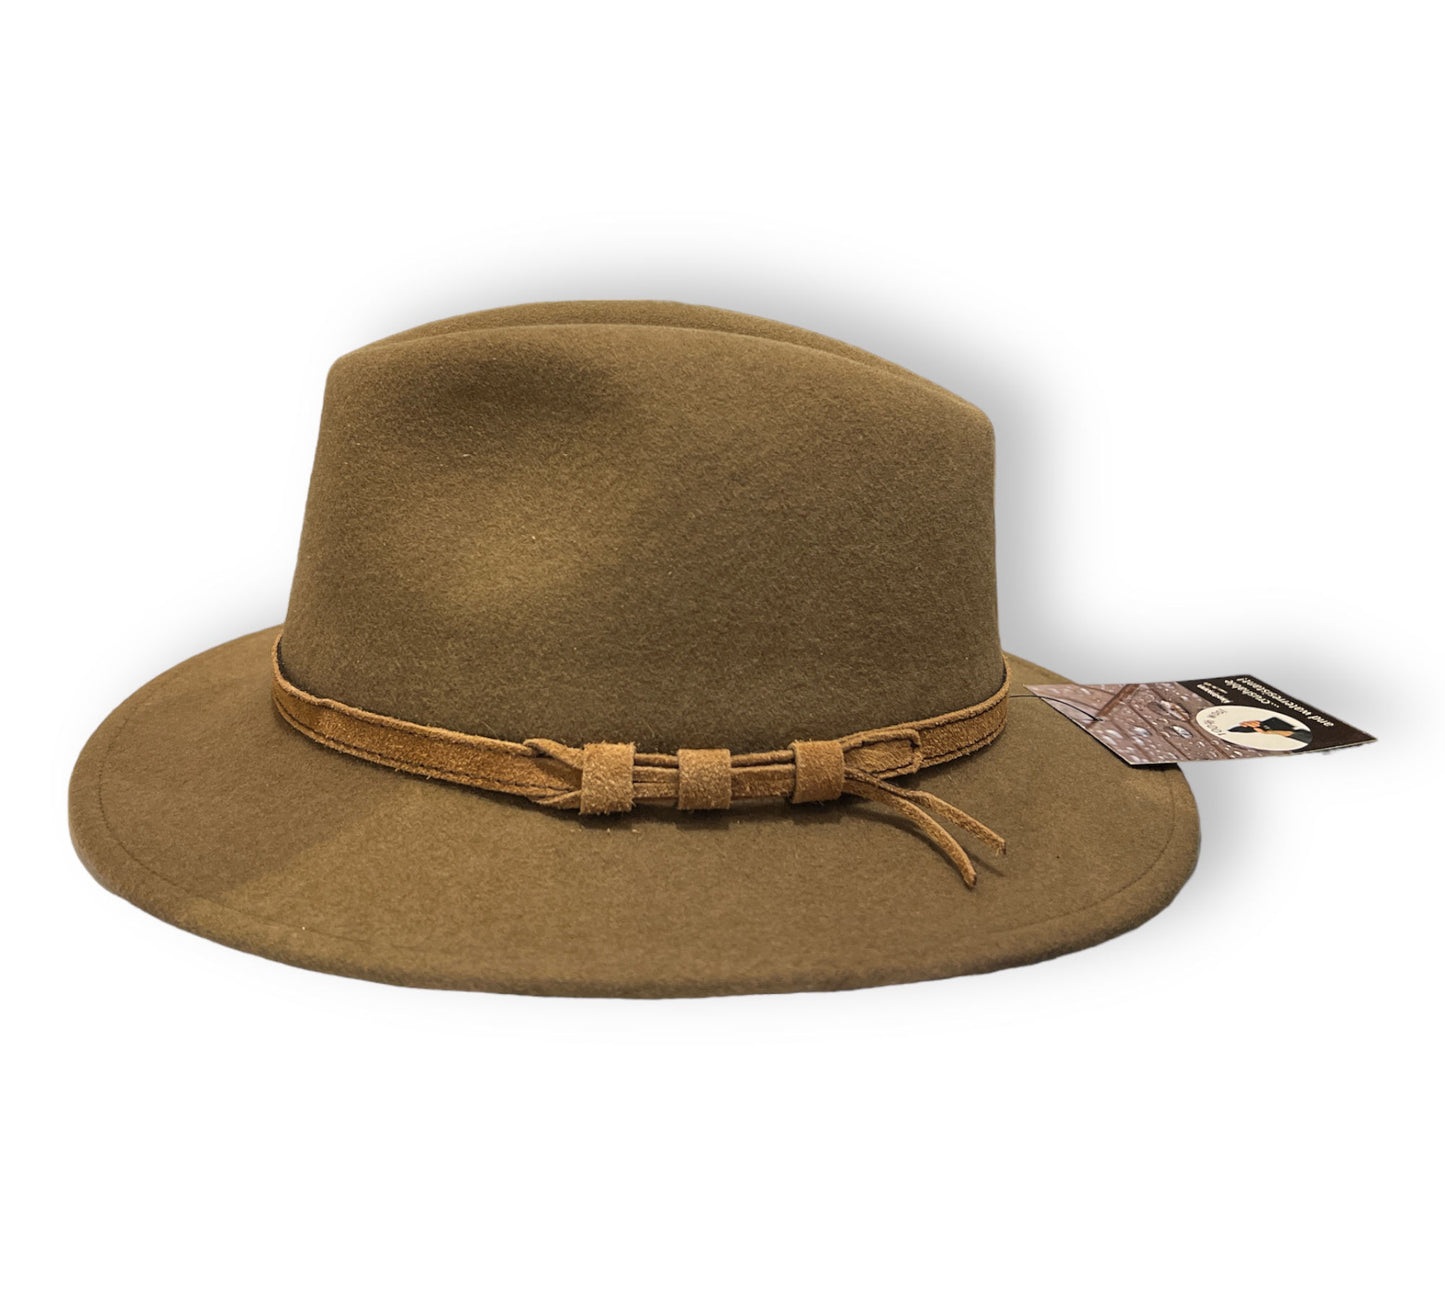 Roll Hat Crushable Wool - Camel / Brown Set